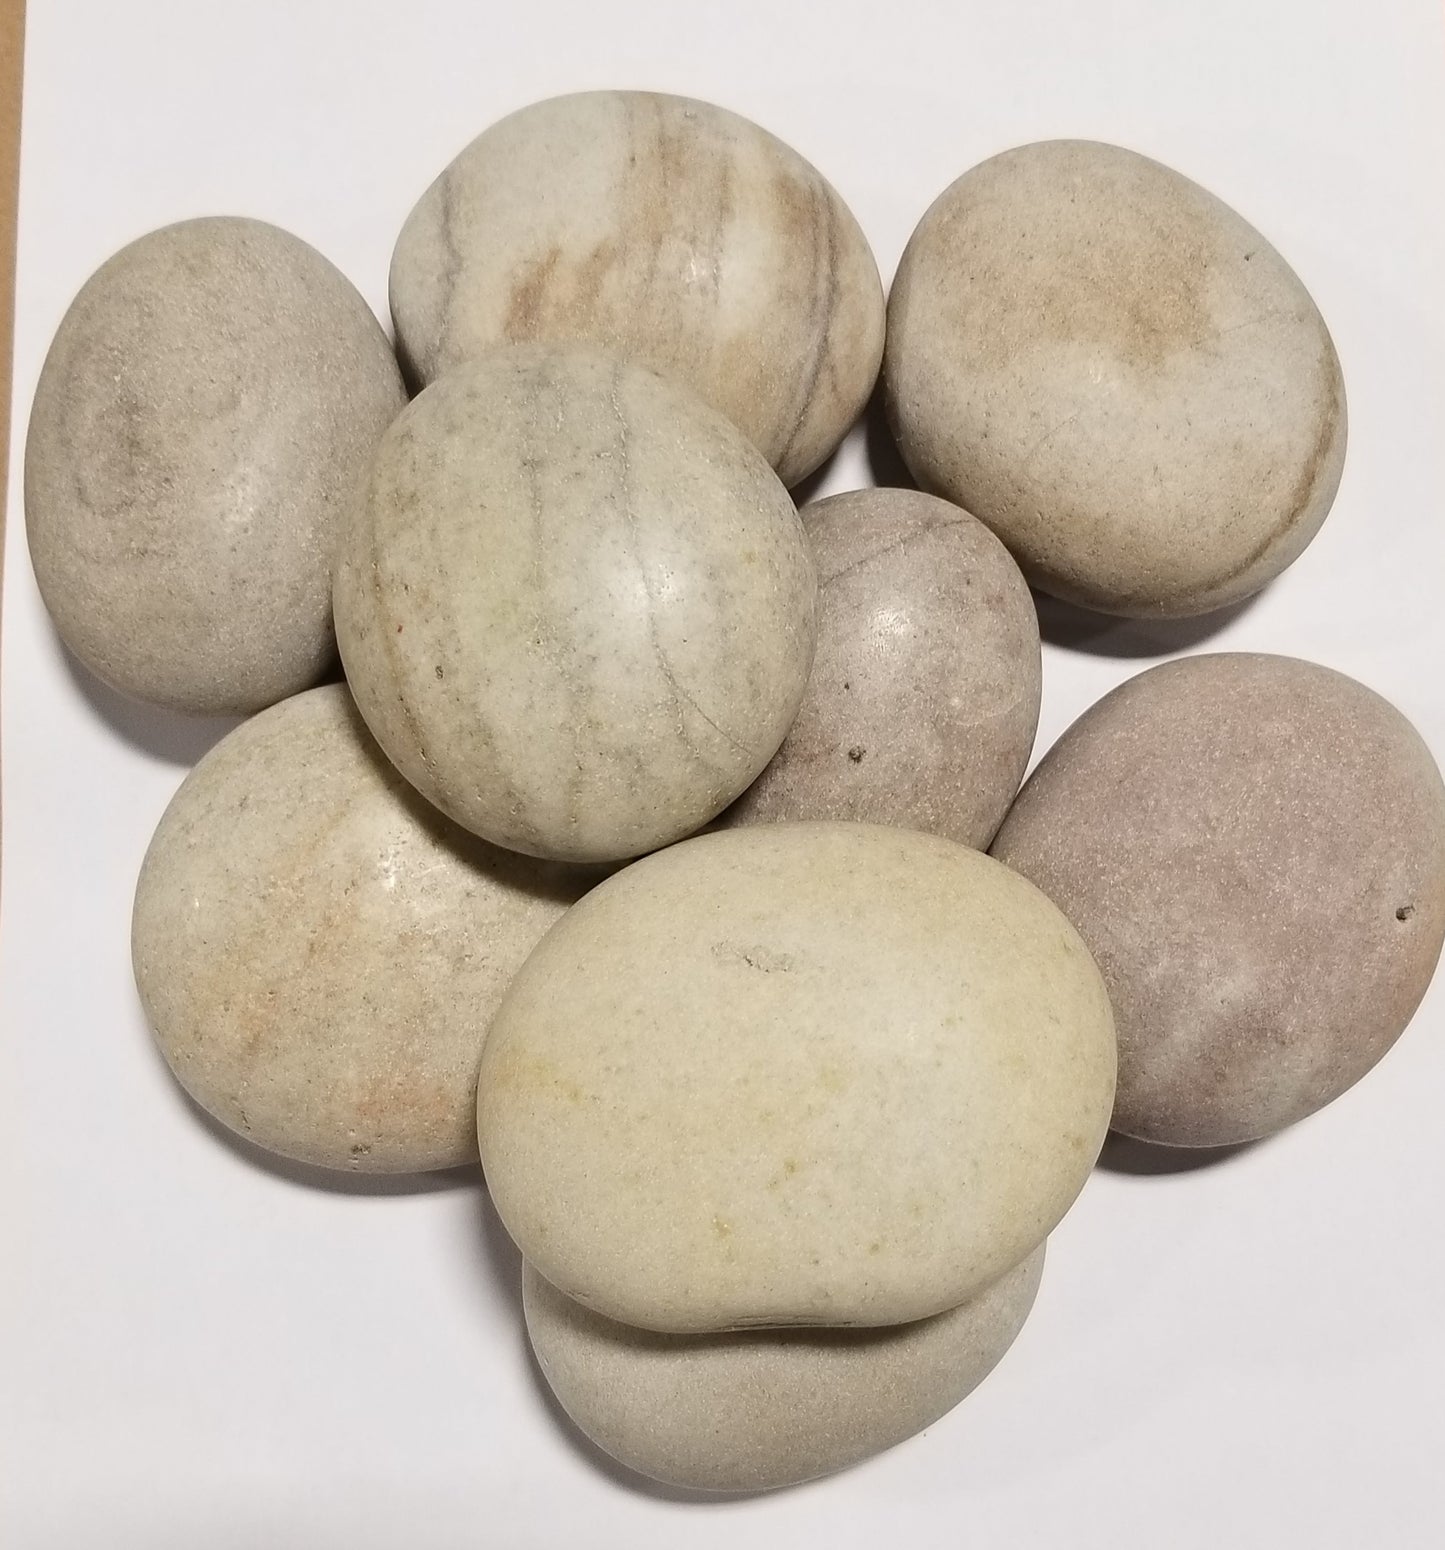 Off White / Light Gray Heat Resistant Polished Fire Stones for Fireplace and Firepits